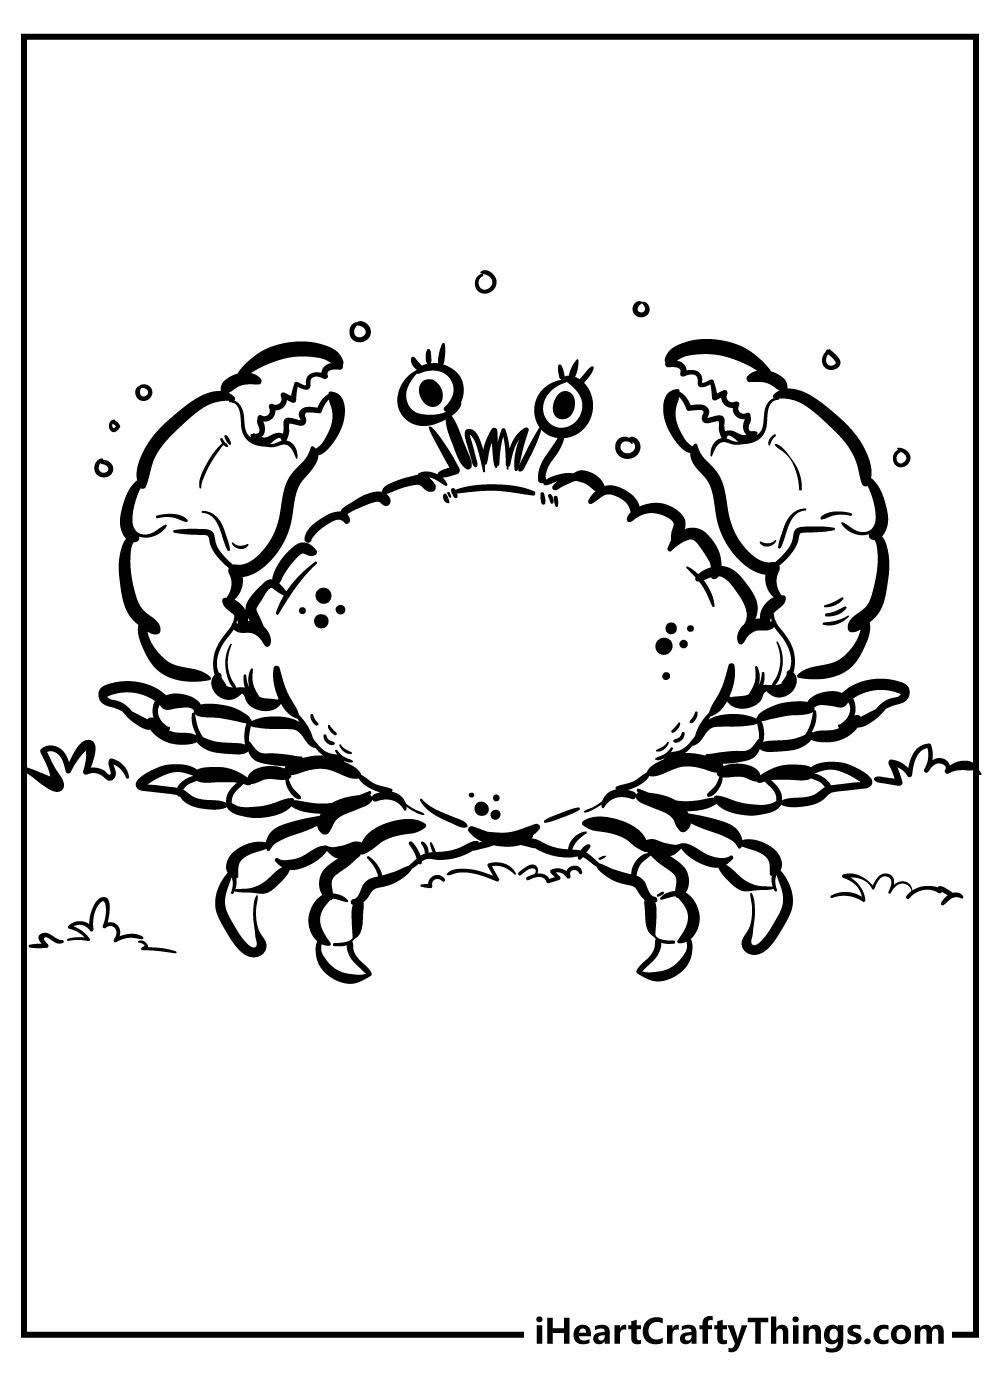 Crab Coloring Pages for kids free download